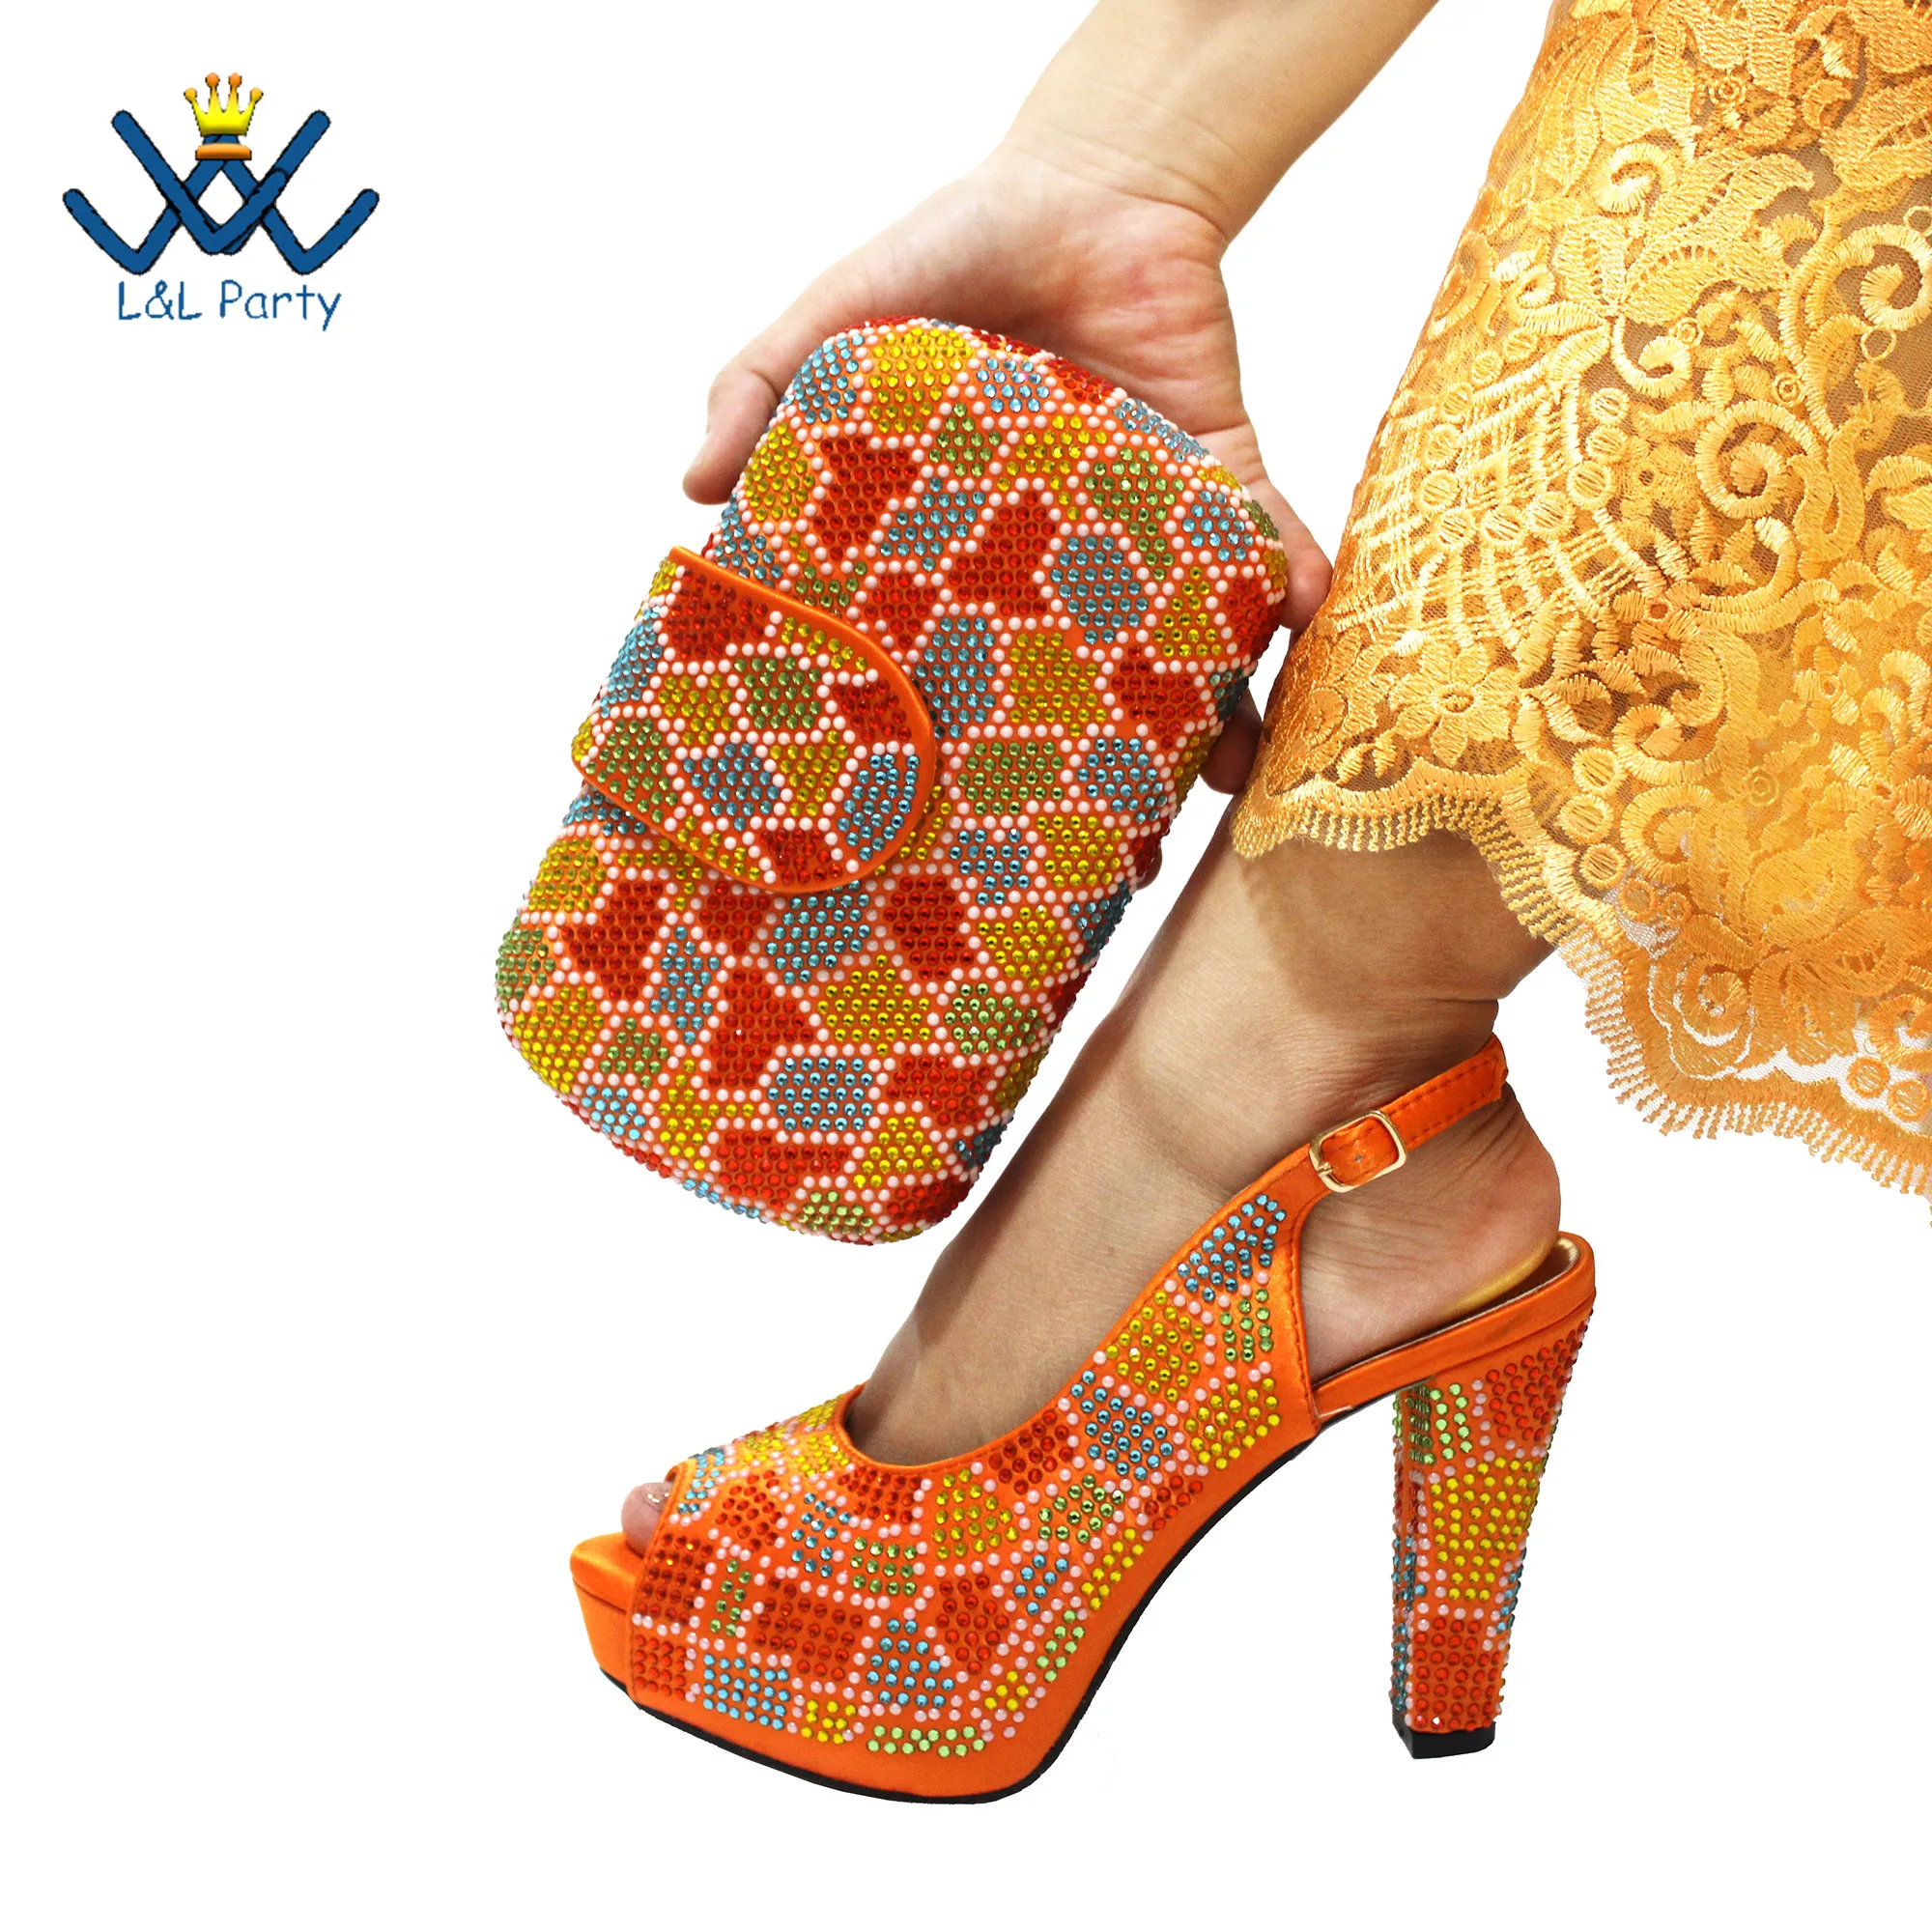 

Mature Style Italian Women Shoes and Bag to Match in Orange Color Shinning Crystal Slingback Sandal with Platform for Party